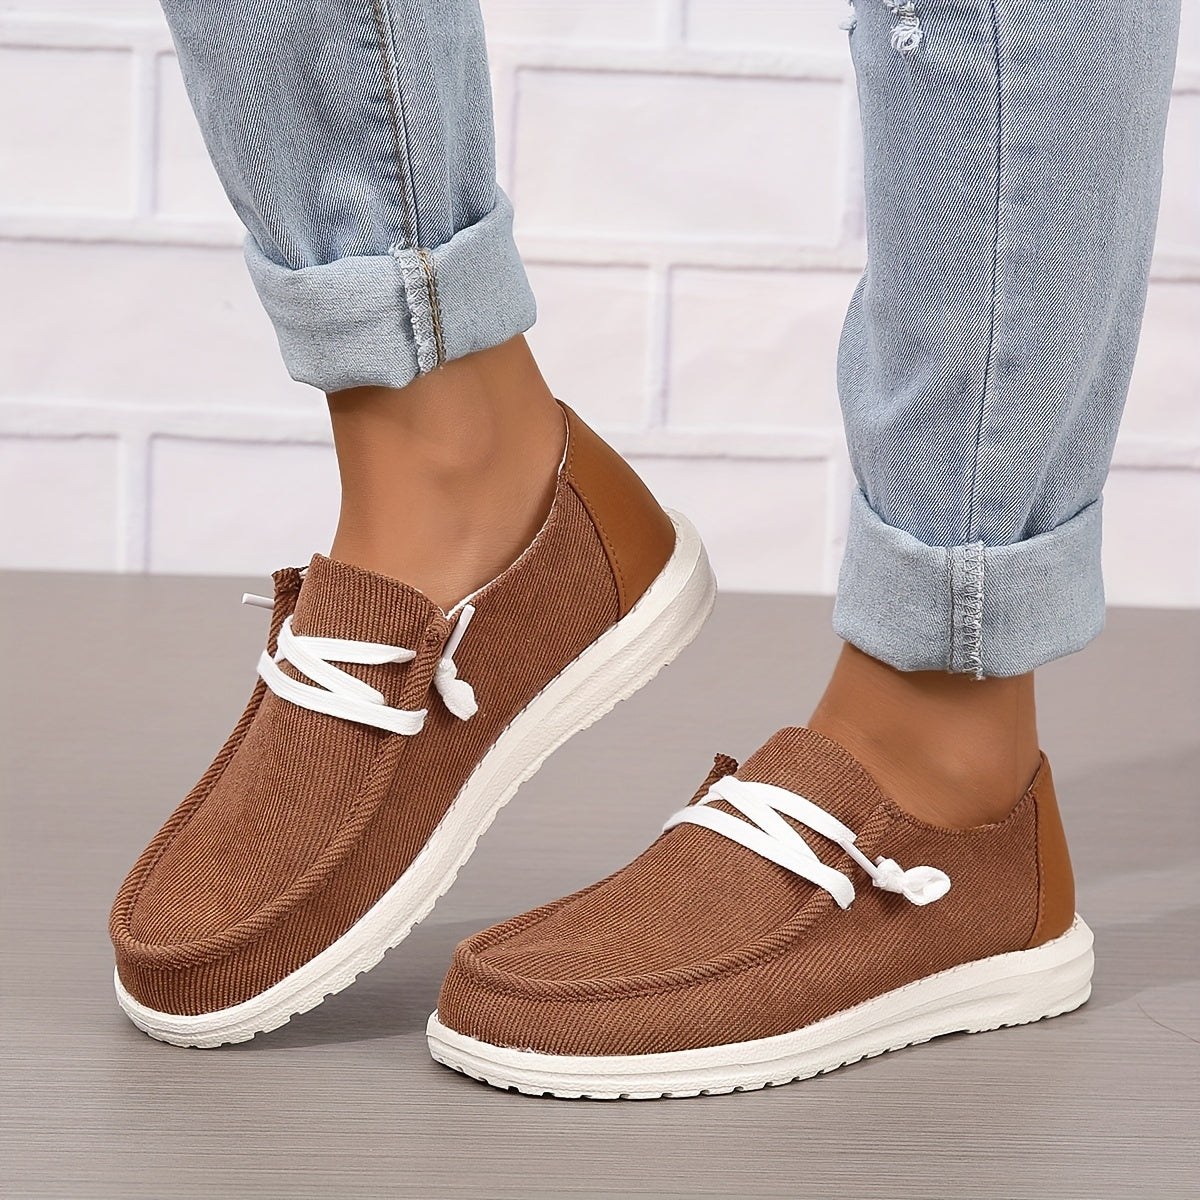 Low Top Corduroy Shoes, Comfy Slip On Walking Loafers